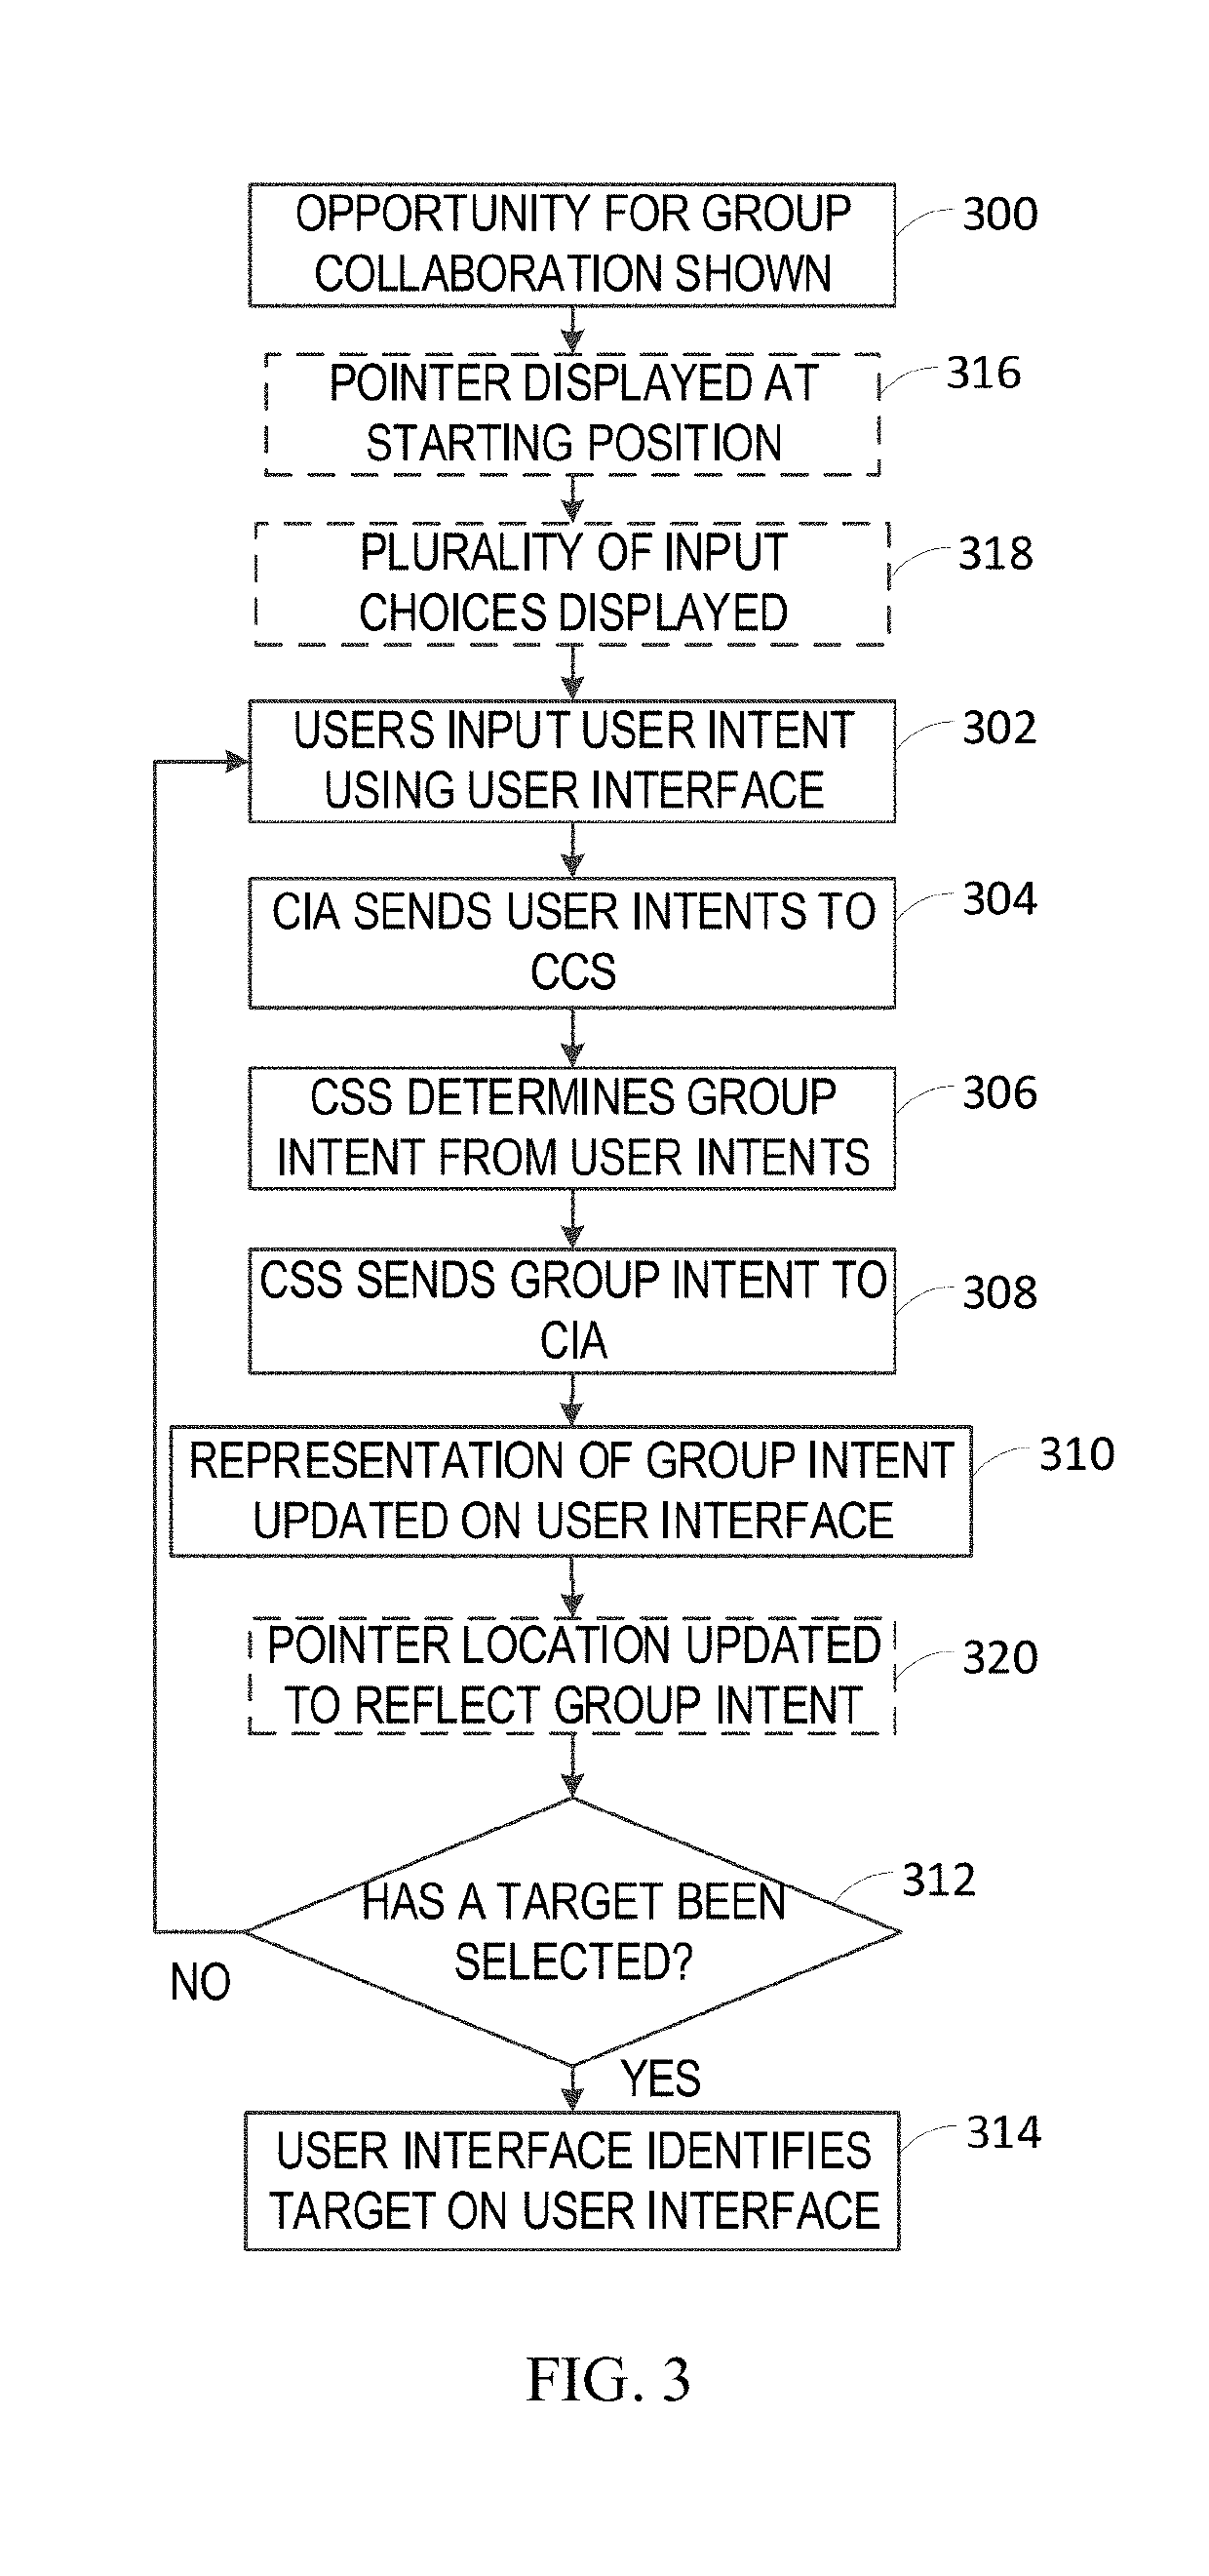 Method and system for a parallel distributed hyper-swarm for amplifying human intelligence